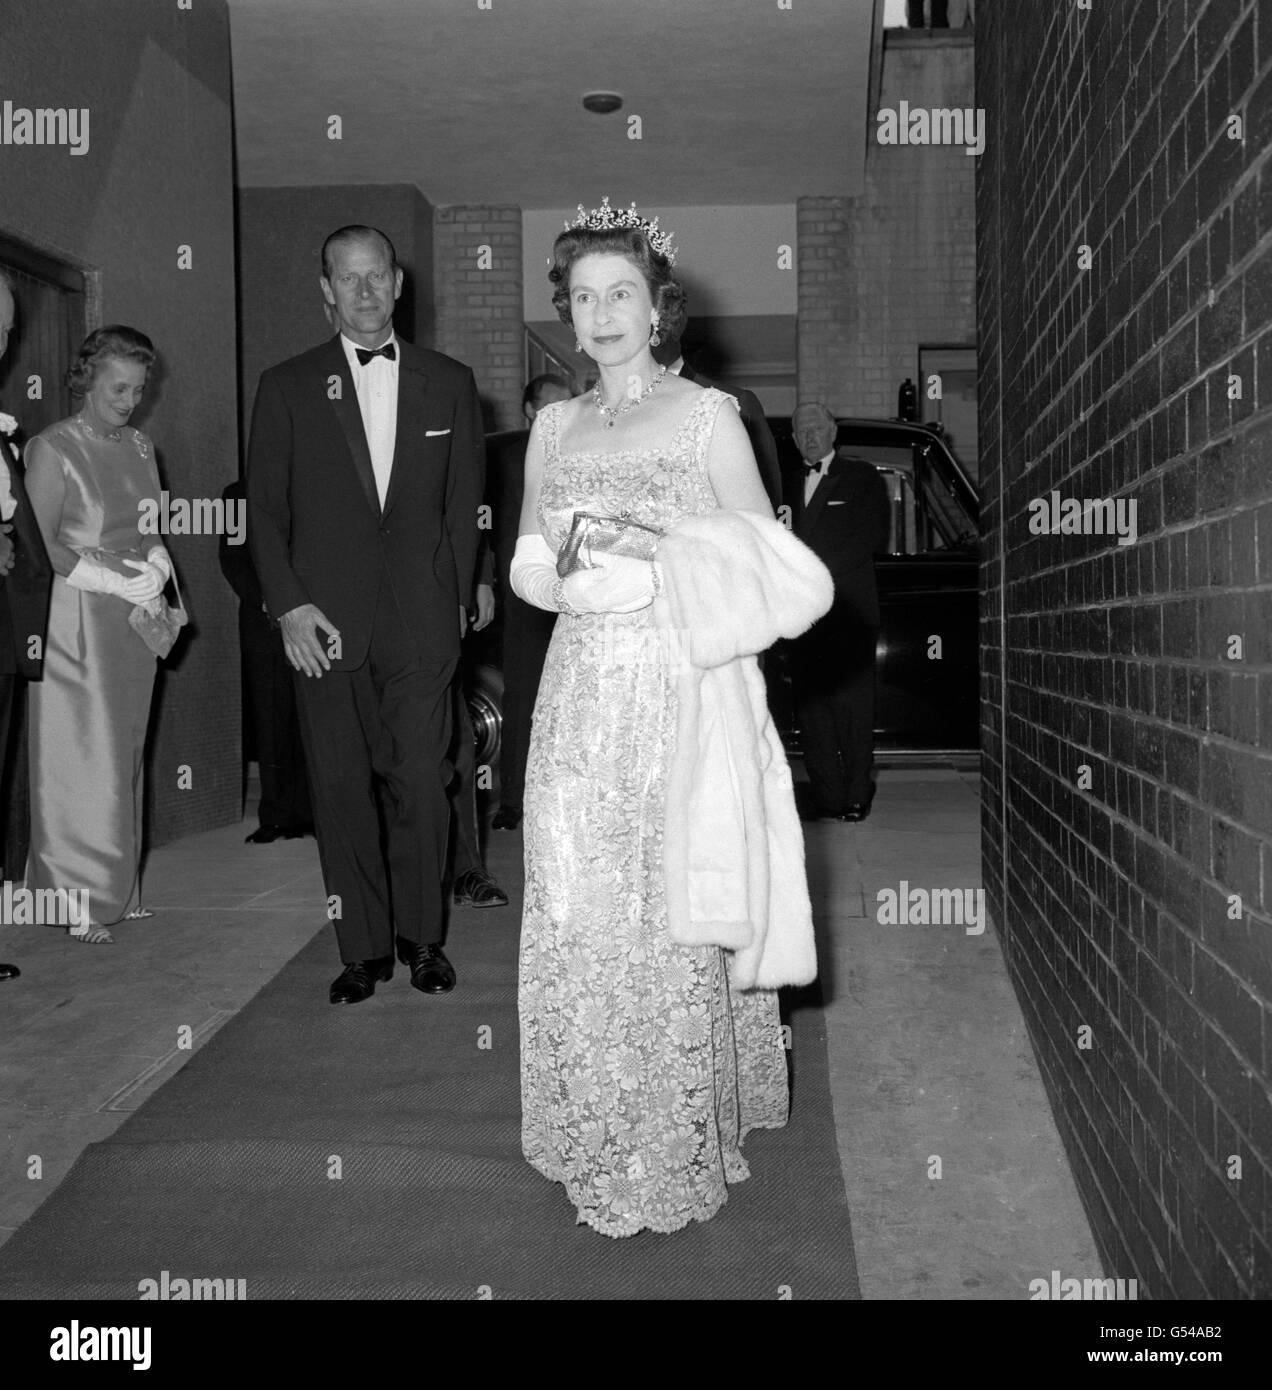 Queen Elizabeth II and the Duke of Edinburgh arriving at the Royal Festival Hall, London, to attend a concert given by the Council of Christians and Jews in celebration of the Council's 25th anniversary. Stock Photo